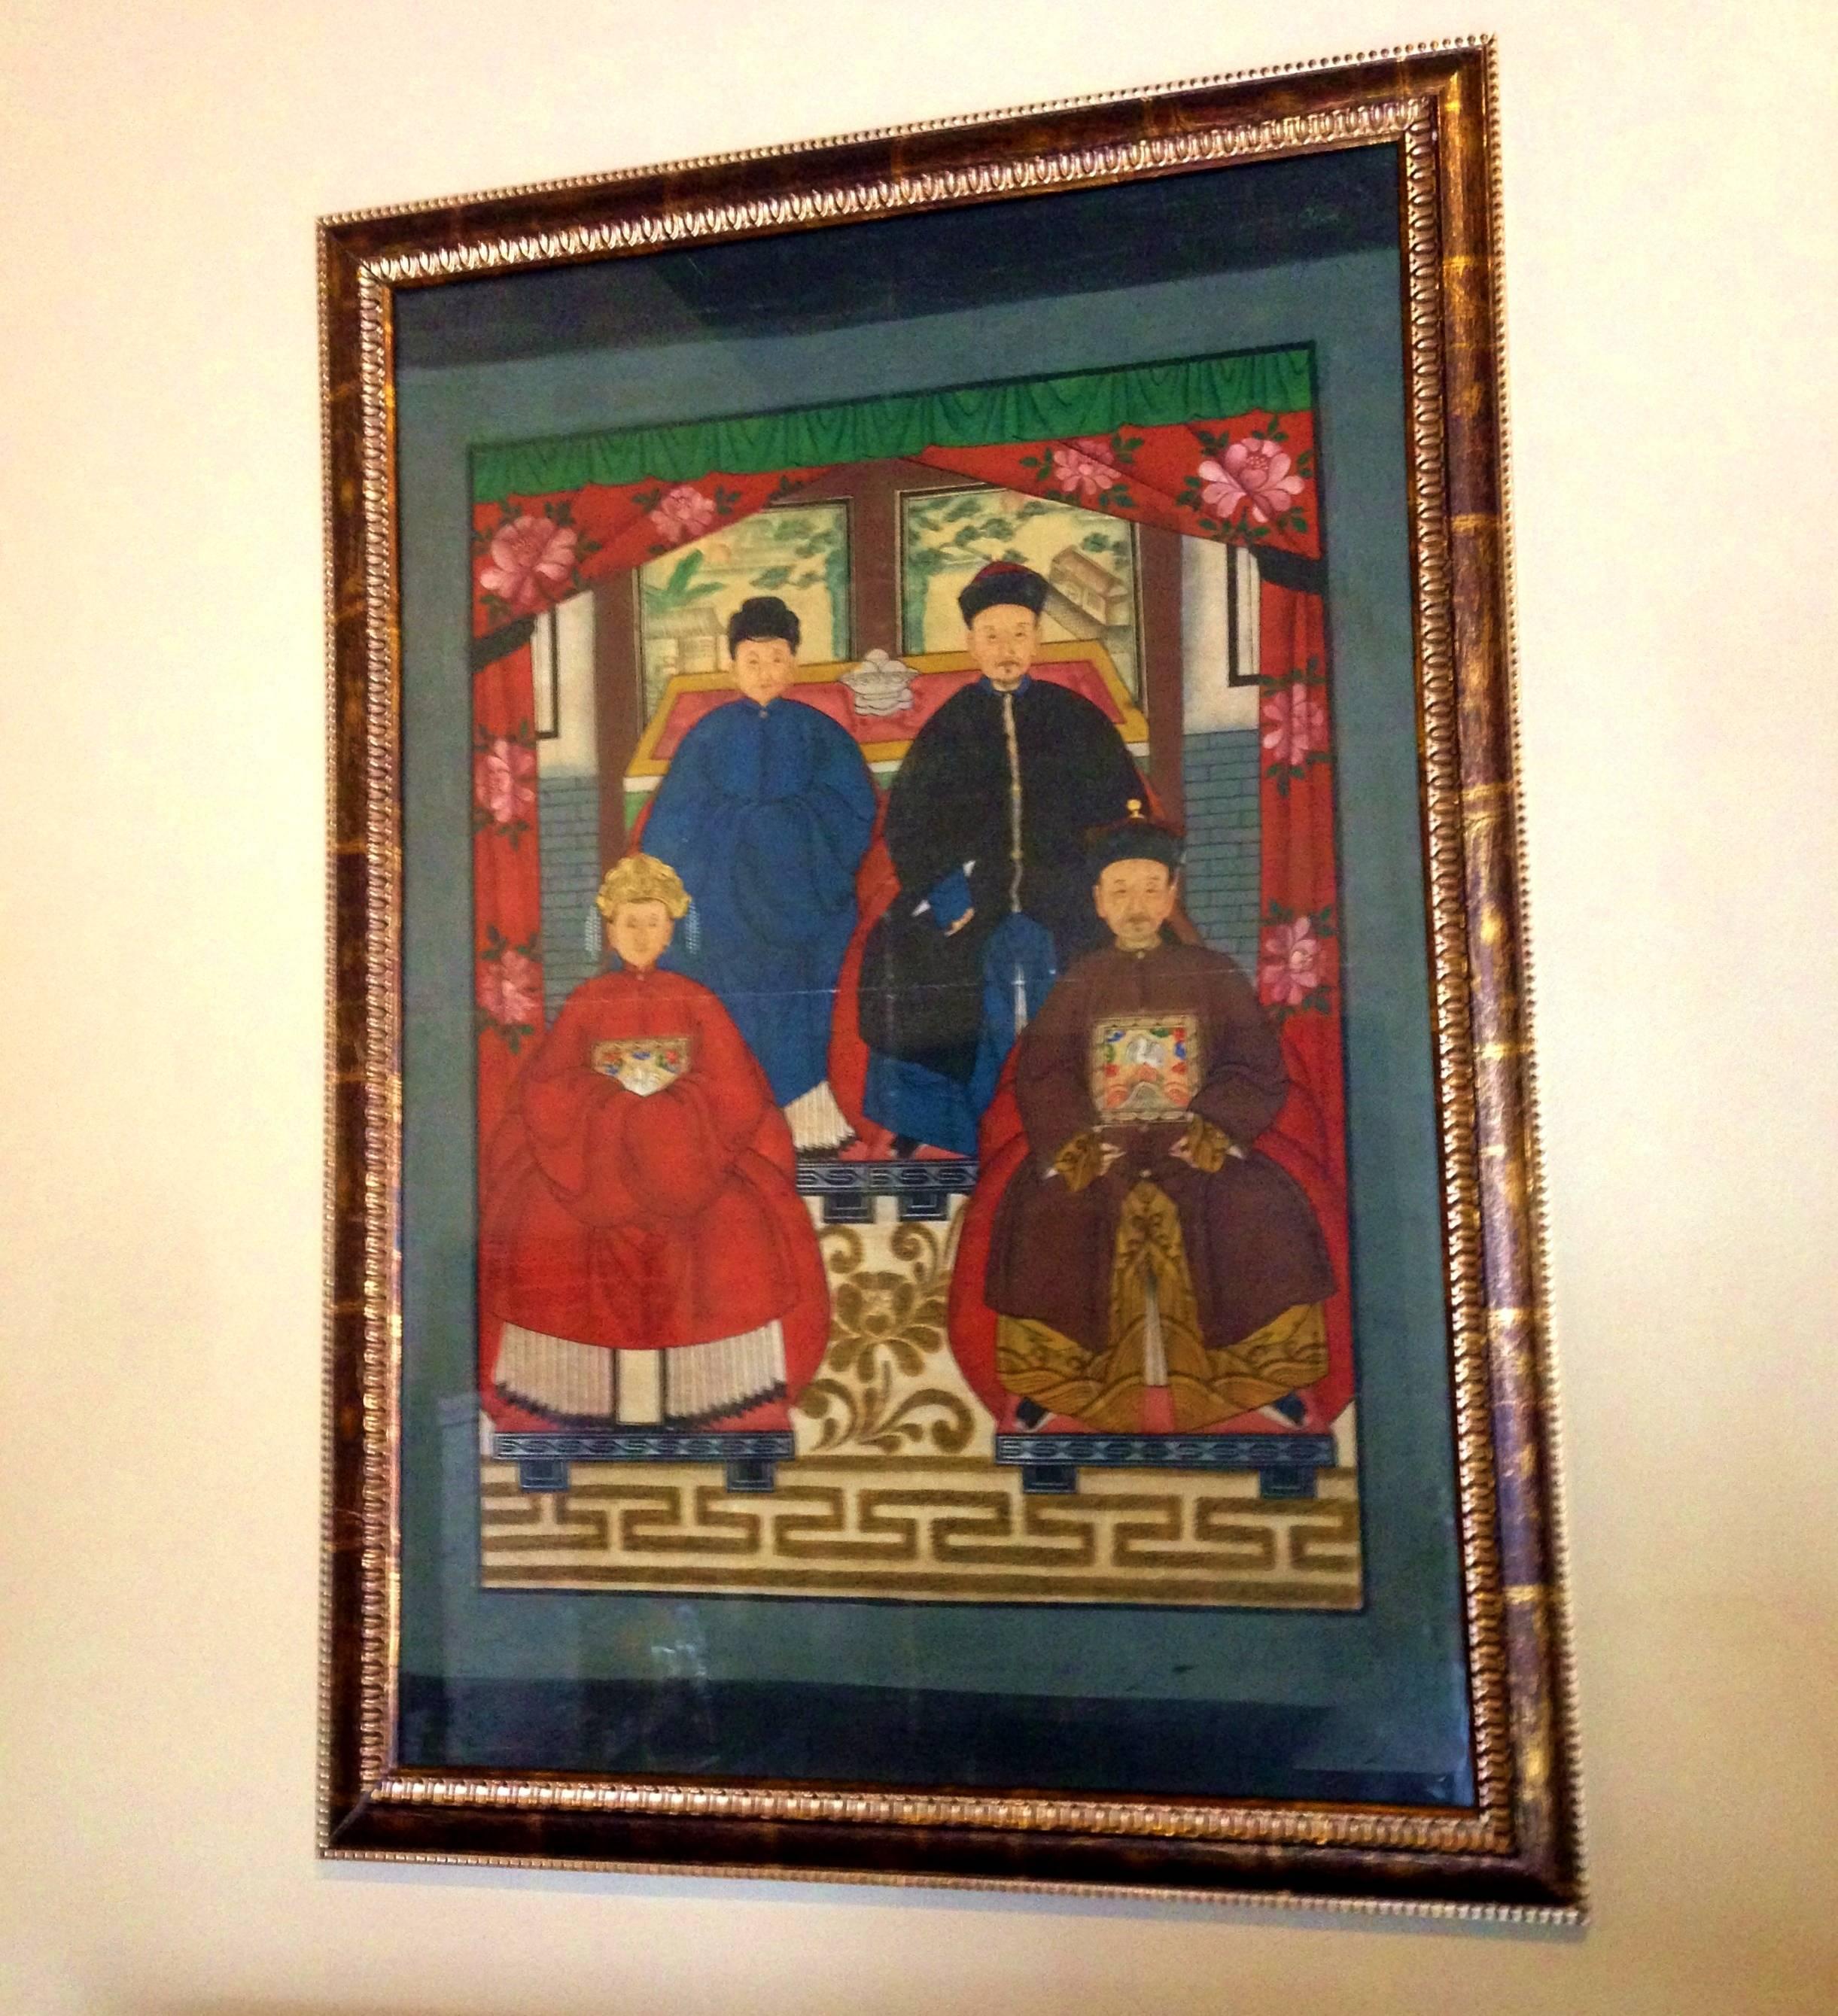 This is an authentic, original, Chinese family ancestor's portrait that is hand-painted on canvas, colored using natural ingredients, such as lapis and saffron. Genuine lapis lazuli stone was grounded to generate the gorgeous blue while saffron and